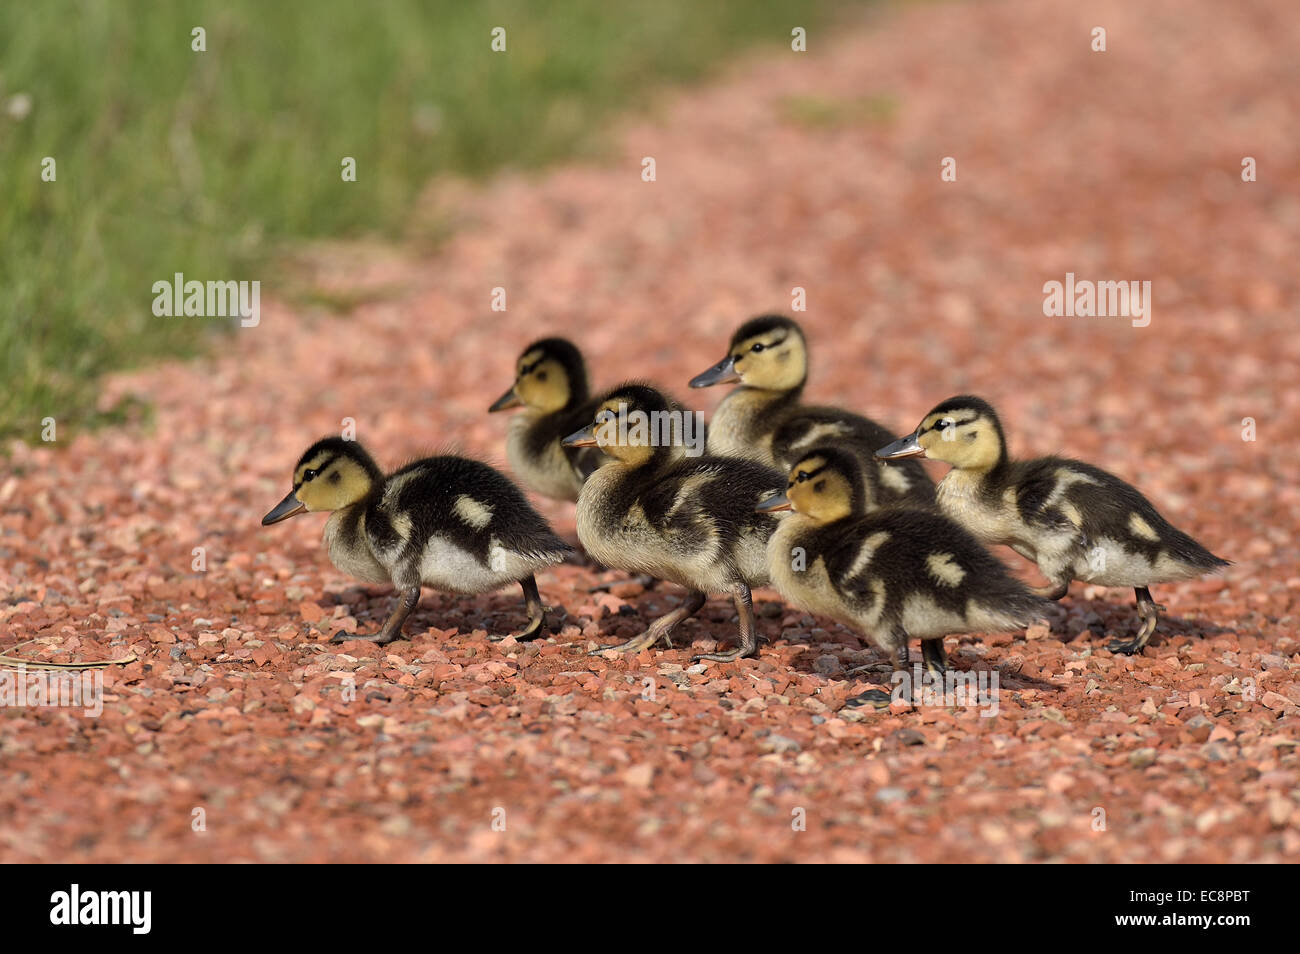 A flock of fluffy Mallard ducklings,  Anas platyrhynchos, crossing a path topped with red stones Stock Photo